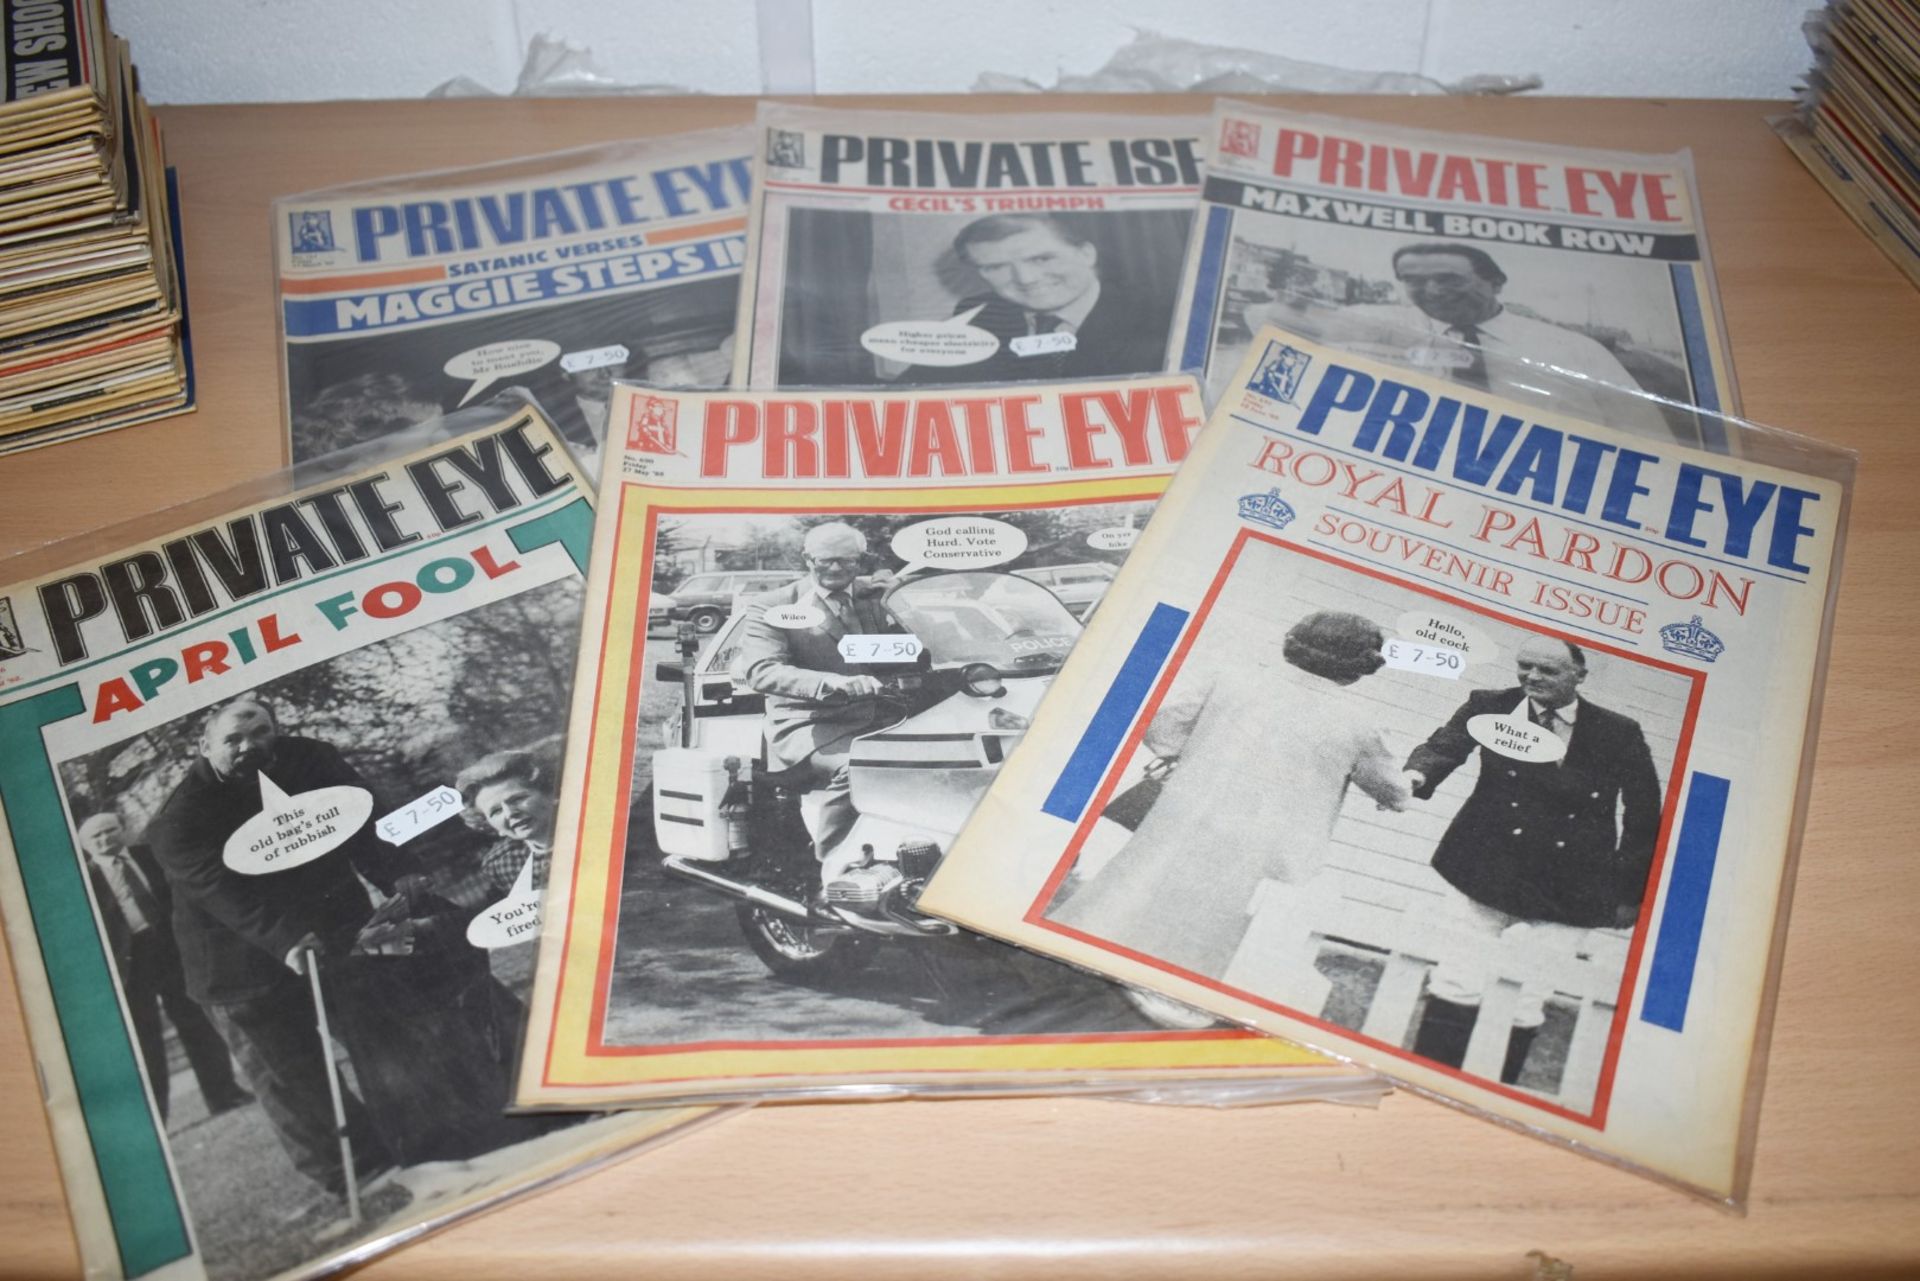 170 x Vintage Private Eye Magazines Dated 1980 to 1989 - Ref MB104 - CL431 - Mostly Packaged Ready - Image 8 of 10